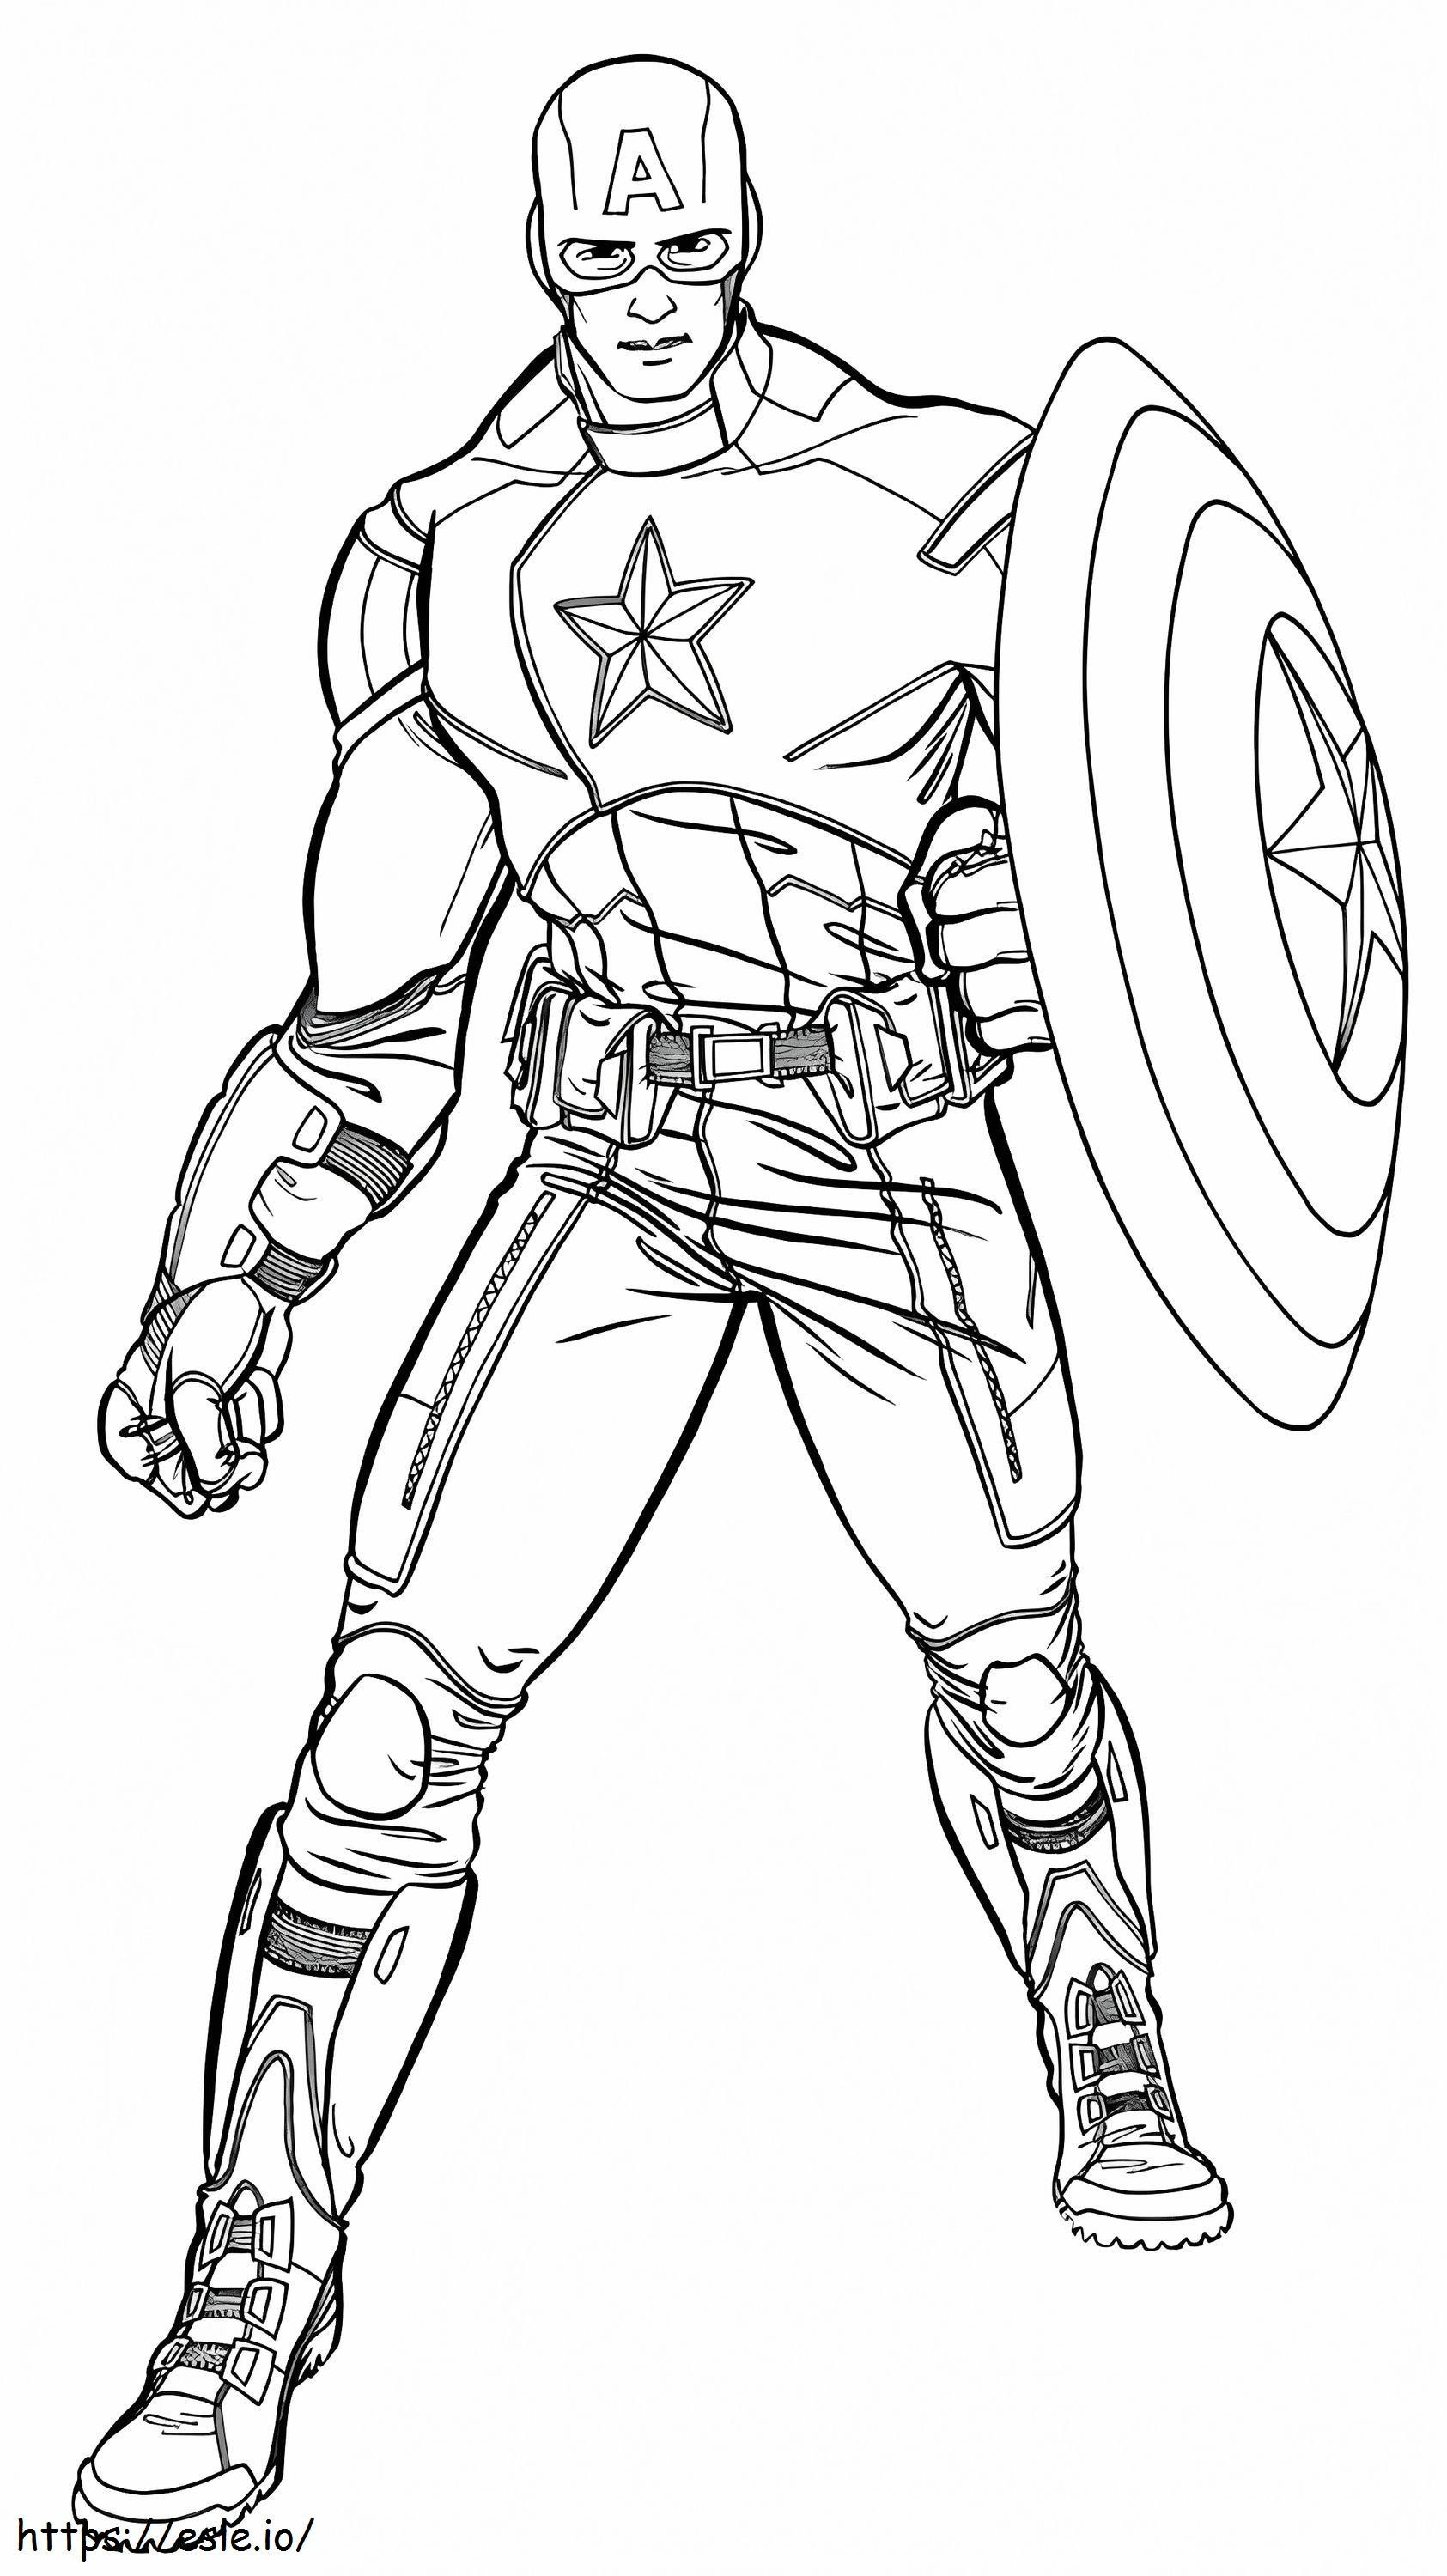 1561017771 Captain America A4 coloring page